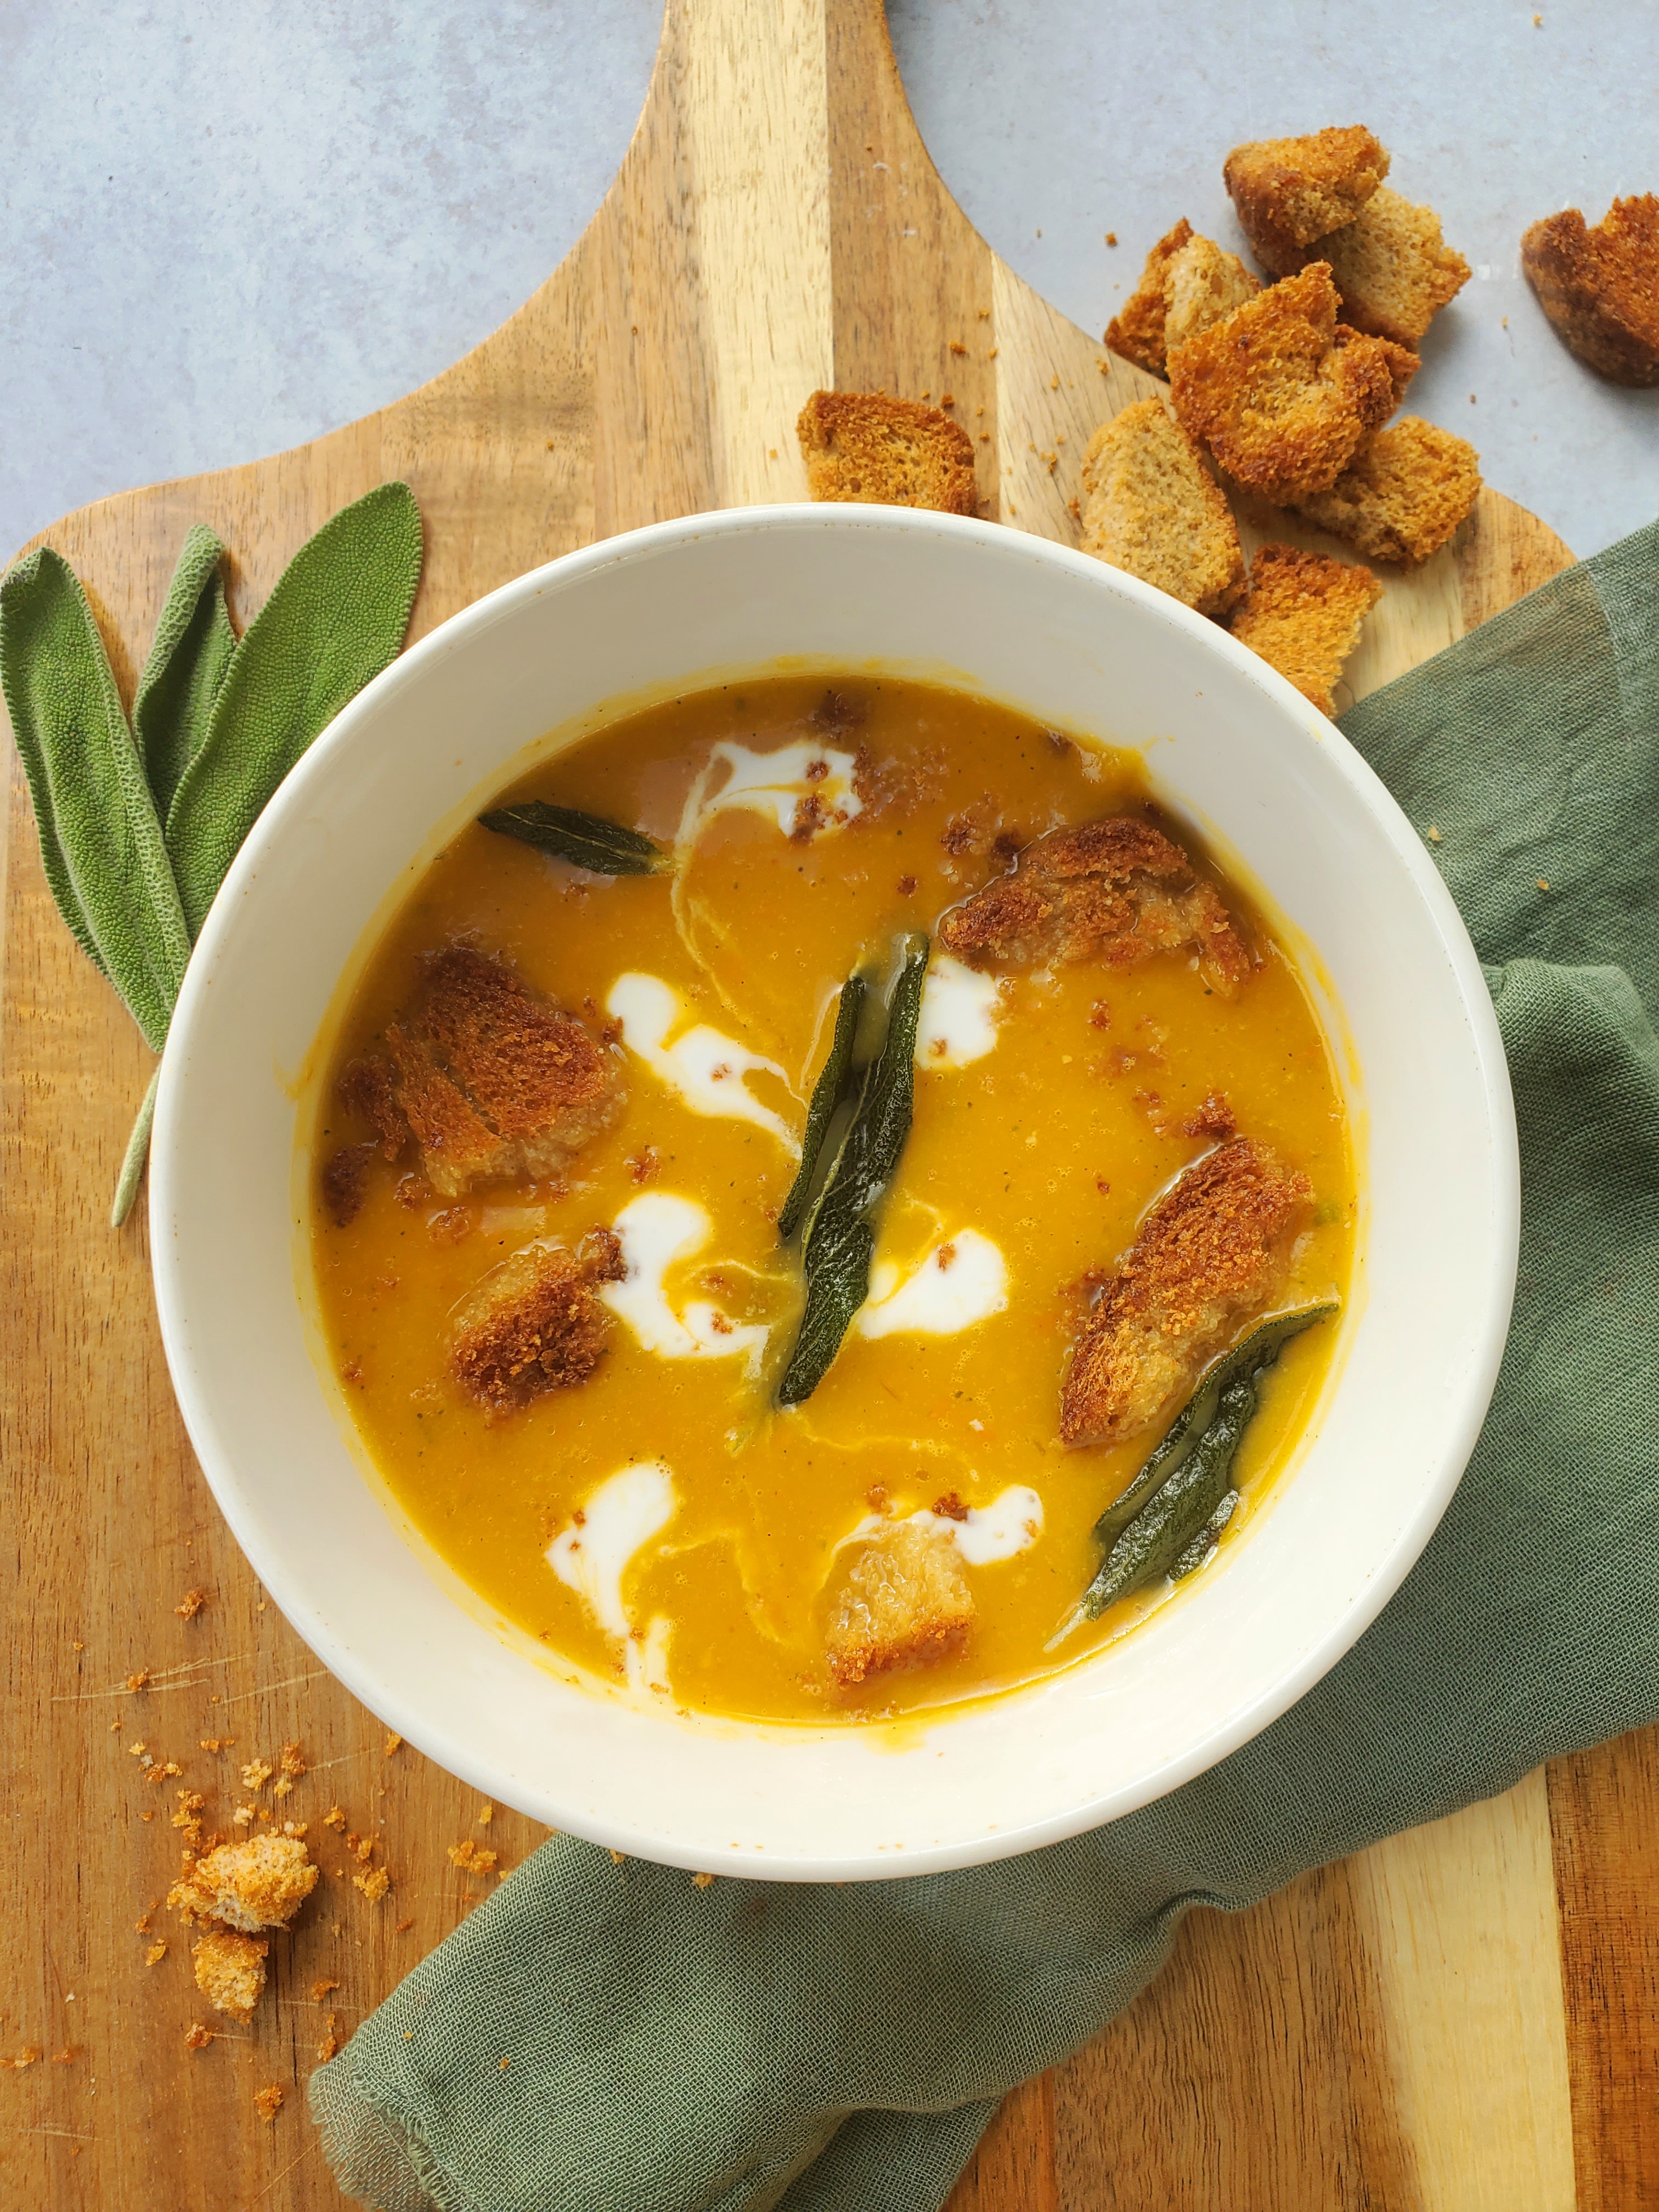 Butternut Squash Soup with Sage leaves and Croutons